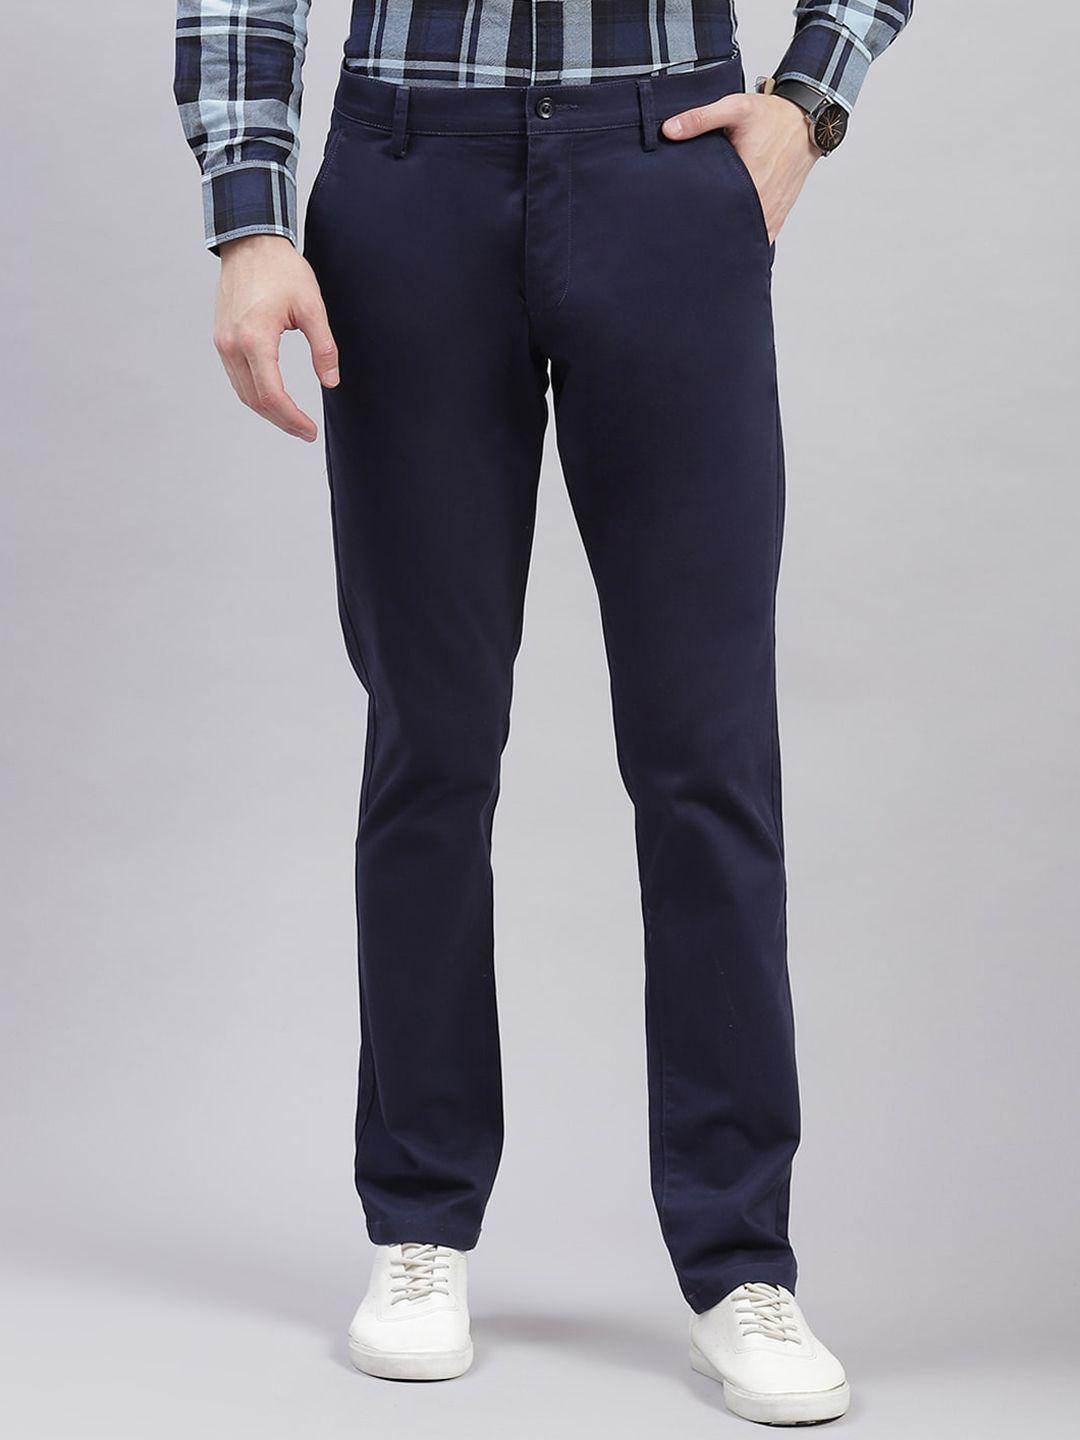 monte-carlo-men-tapered-fit-chinos-trousers